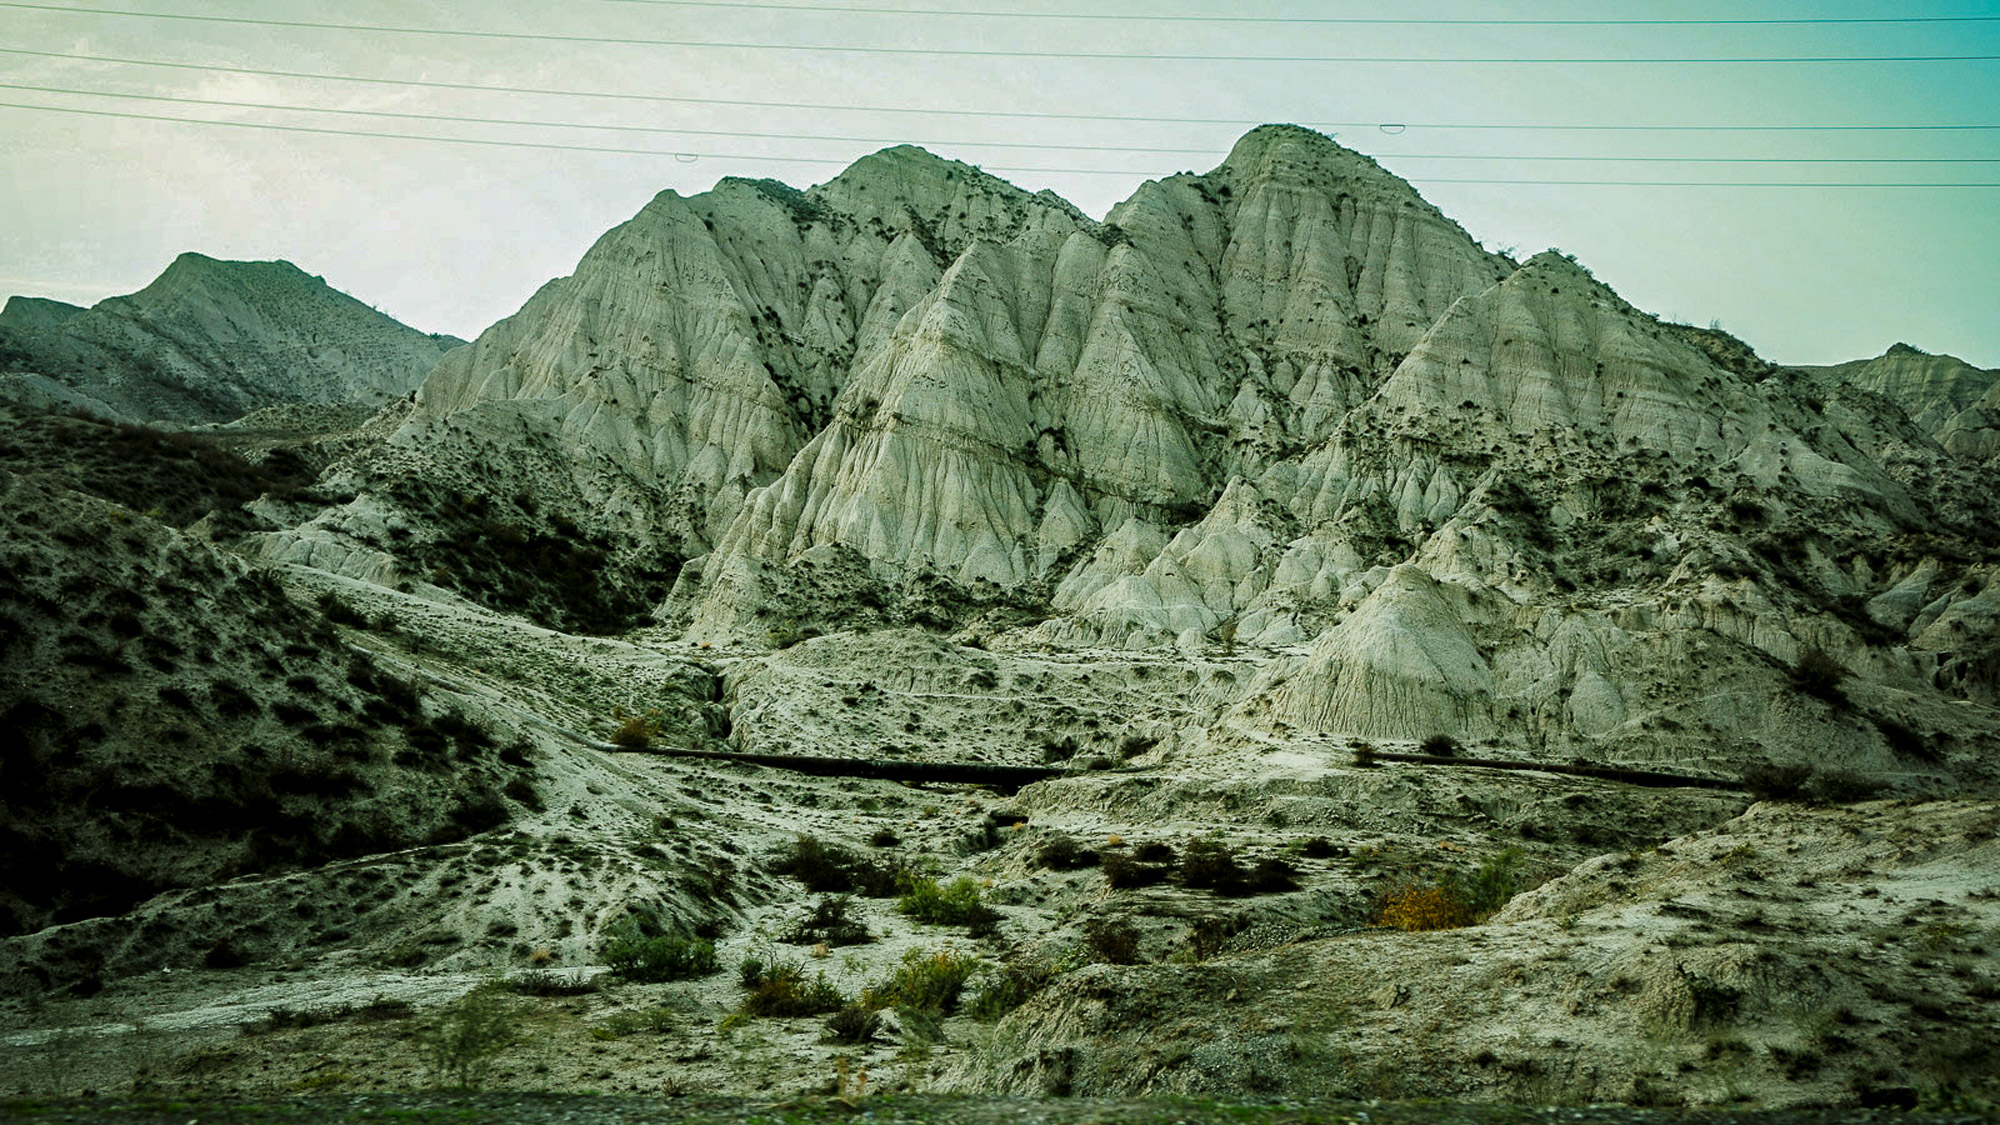 Sparse landscape with mountain formation